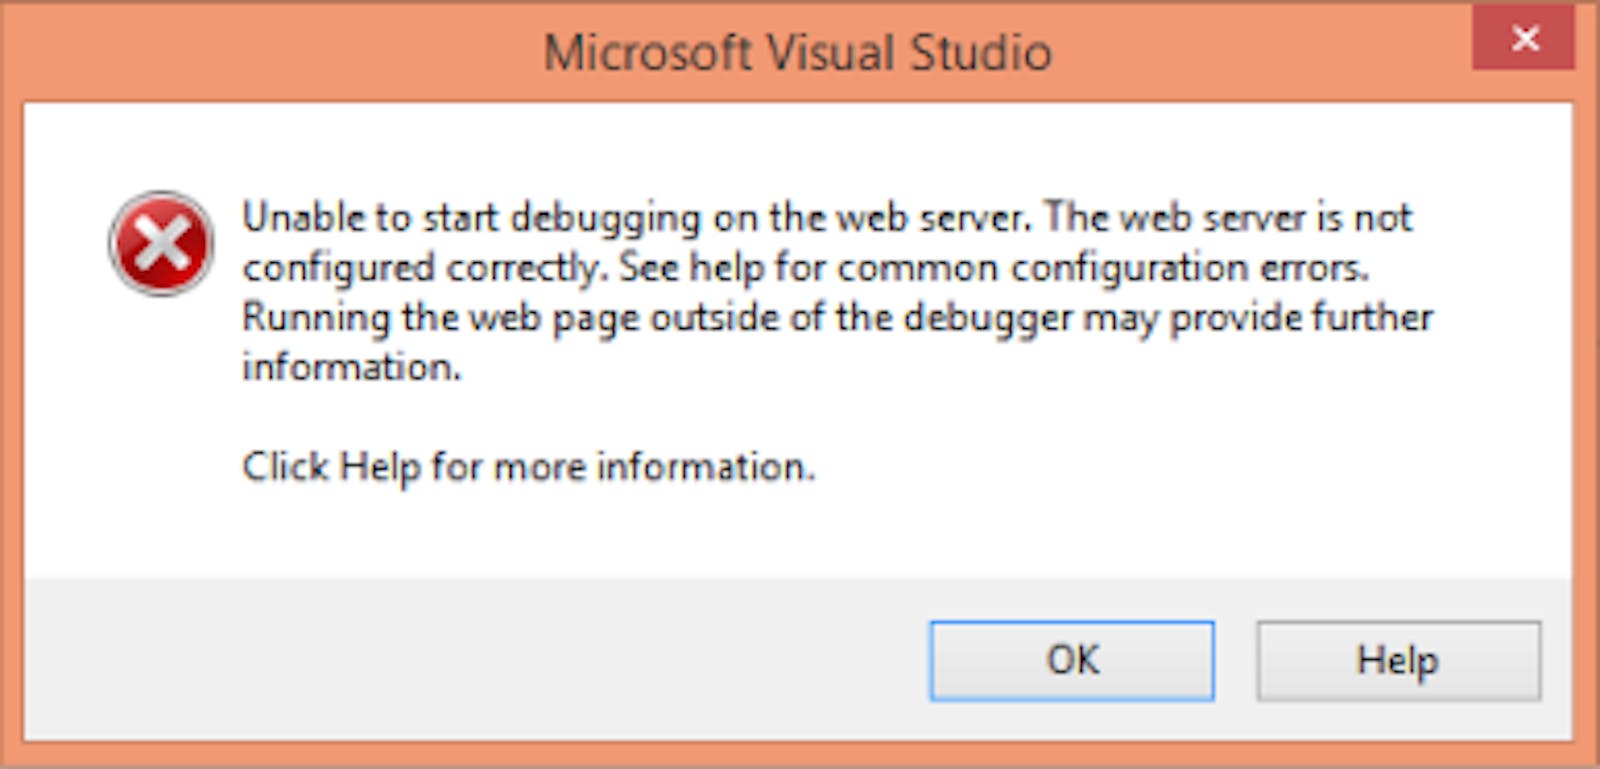 Unable to Start Debugging on the Web Server. The Web Server is not Configured correctly.